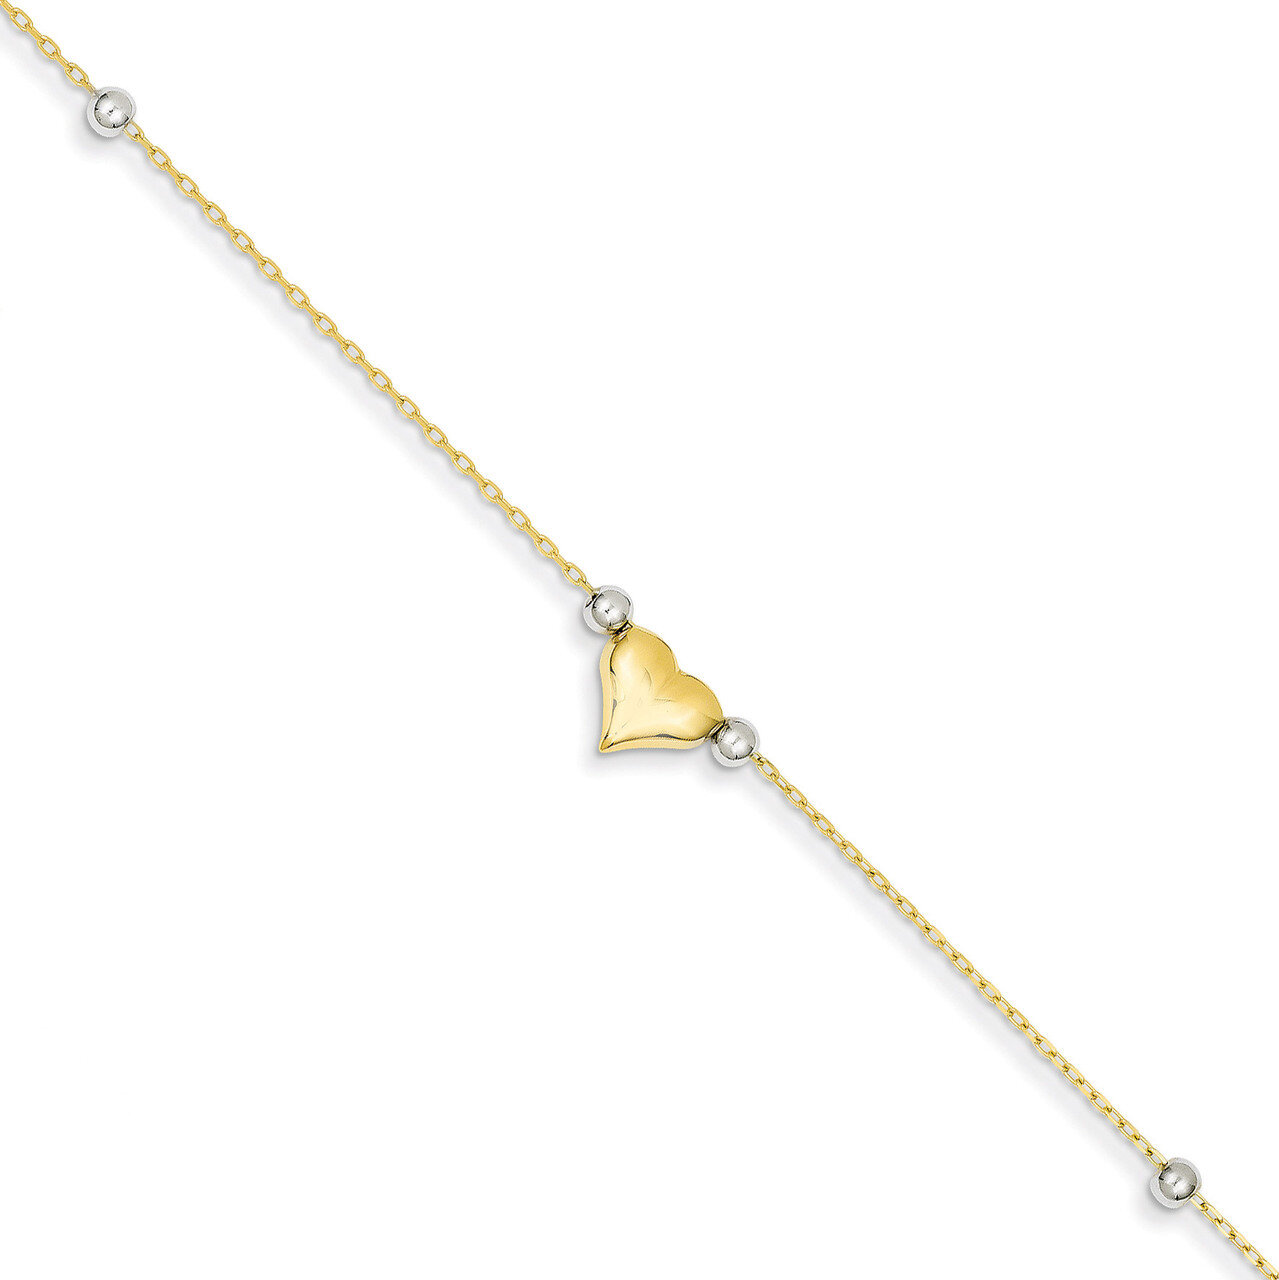 Polished Puffed Heart with Beads Anklet 10 Inch 14k Two-Tone Gold ANK48-10